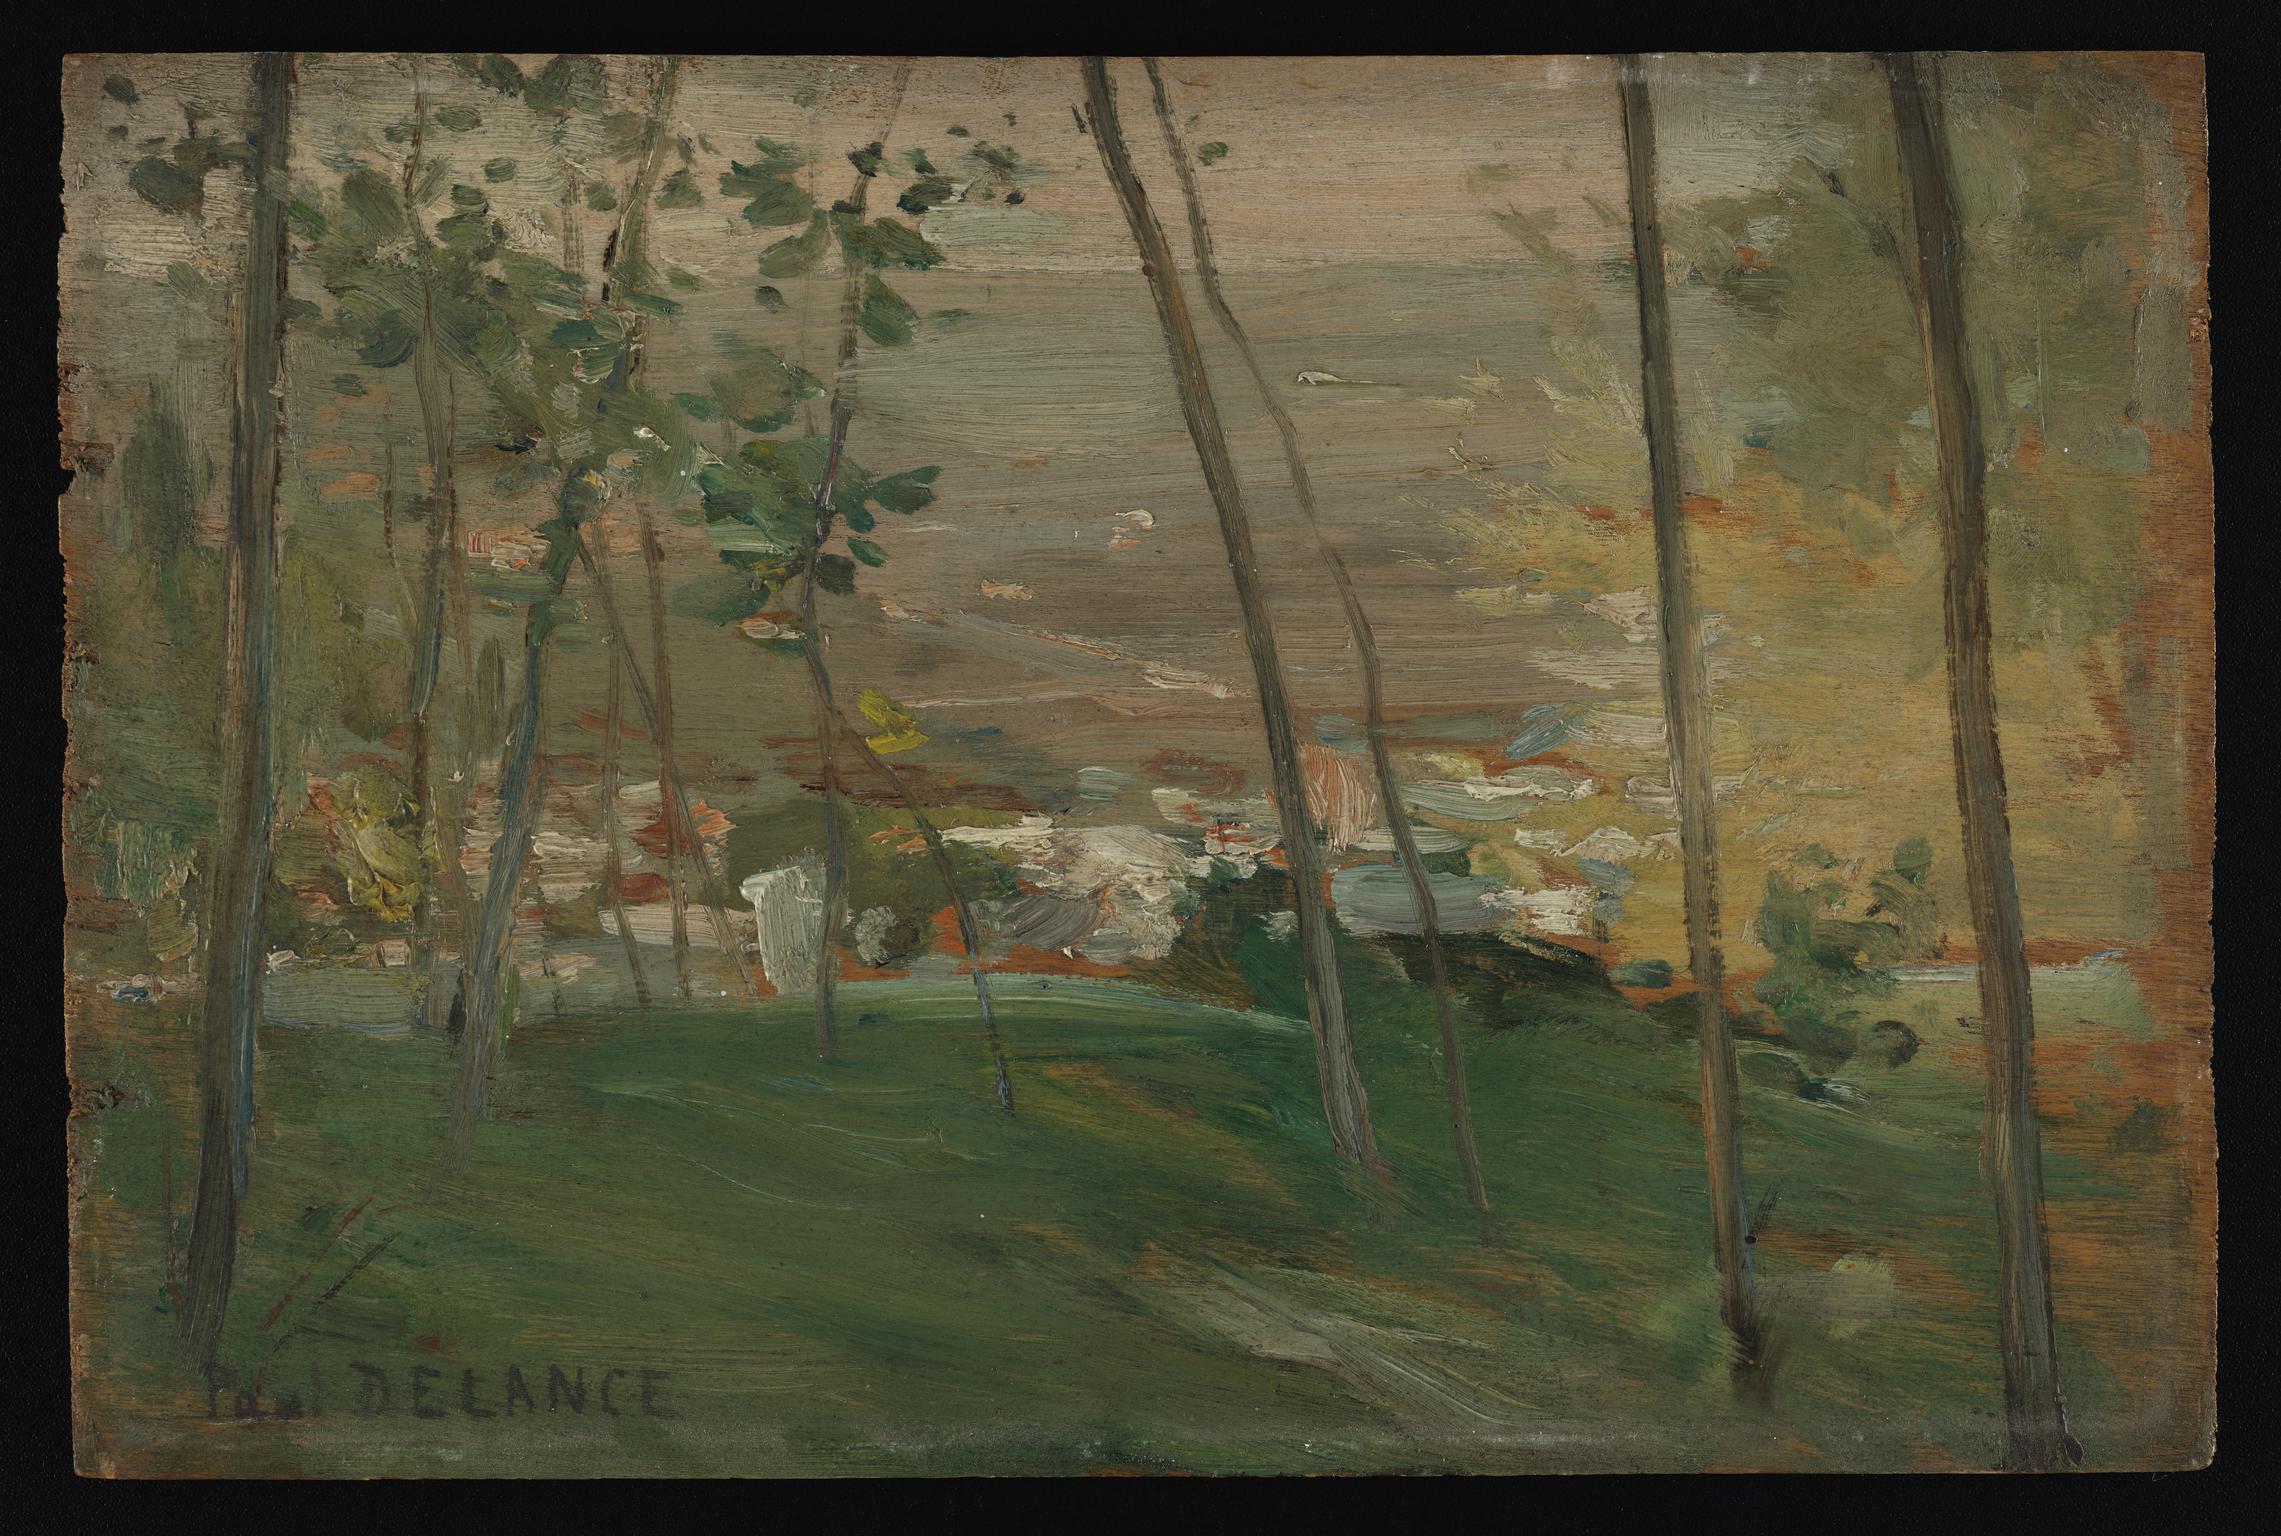 View from a Hill, Sannois, Seine-et-Oise